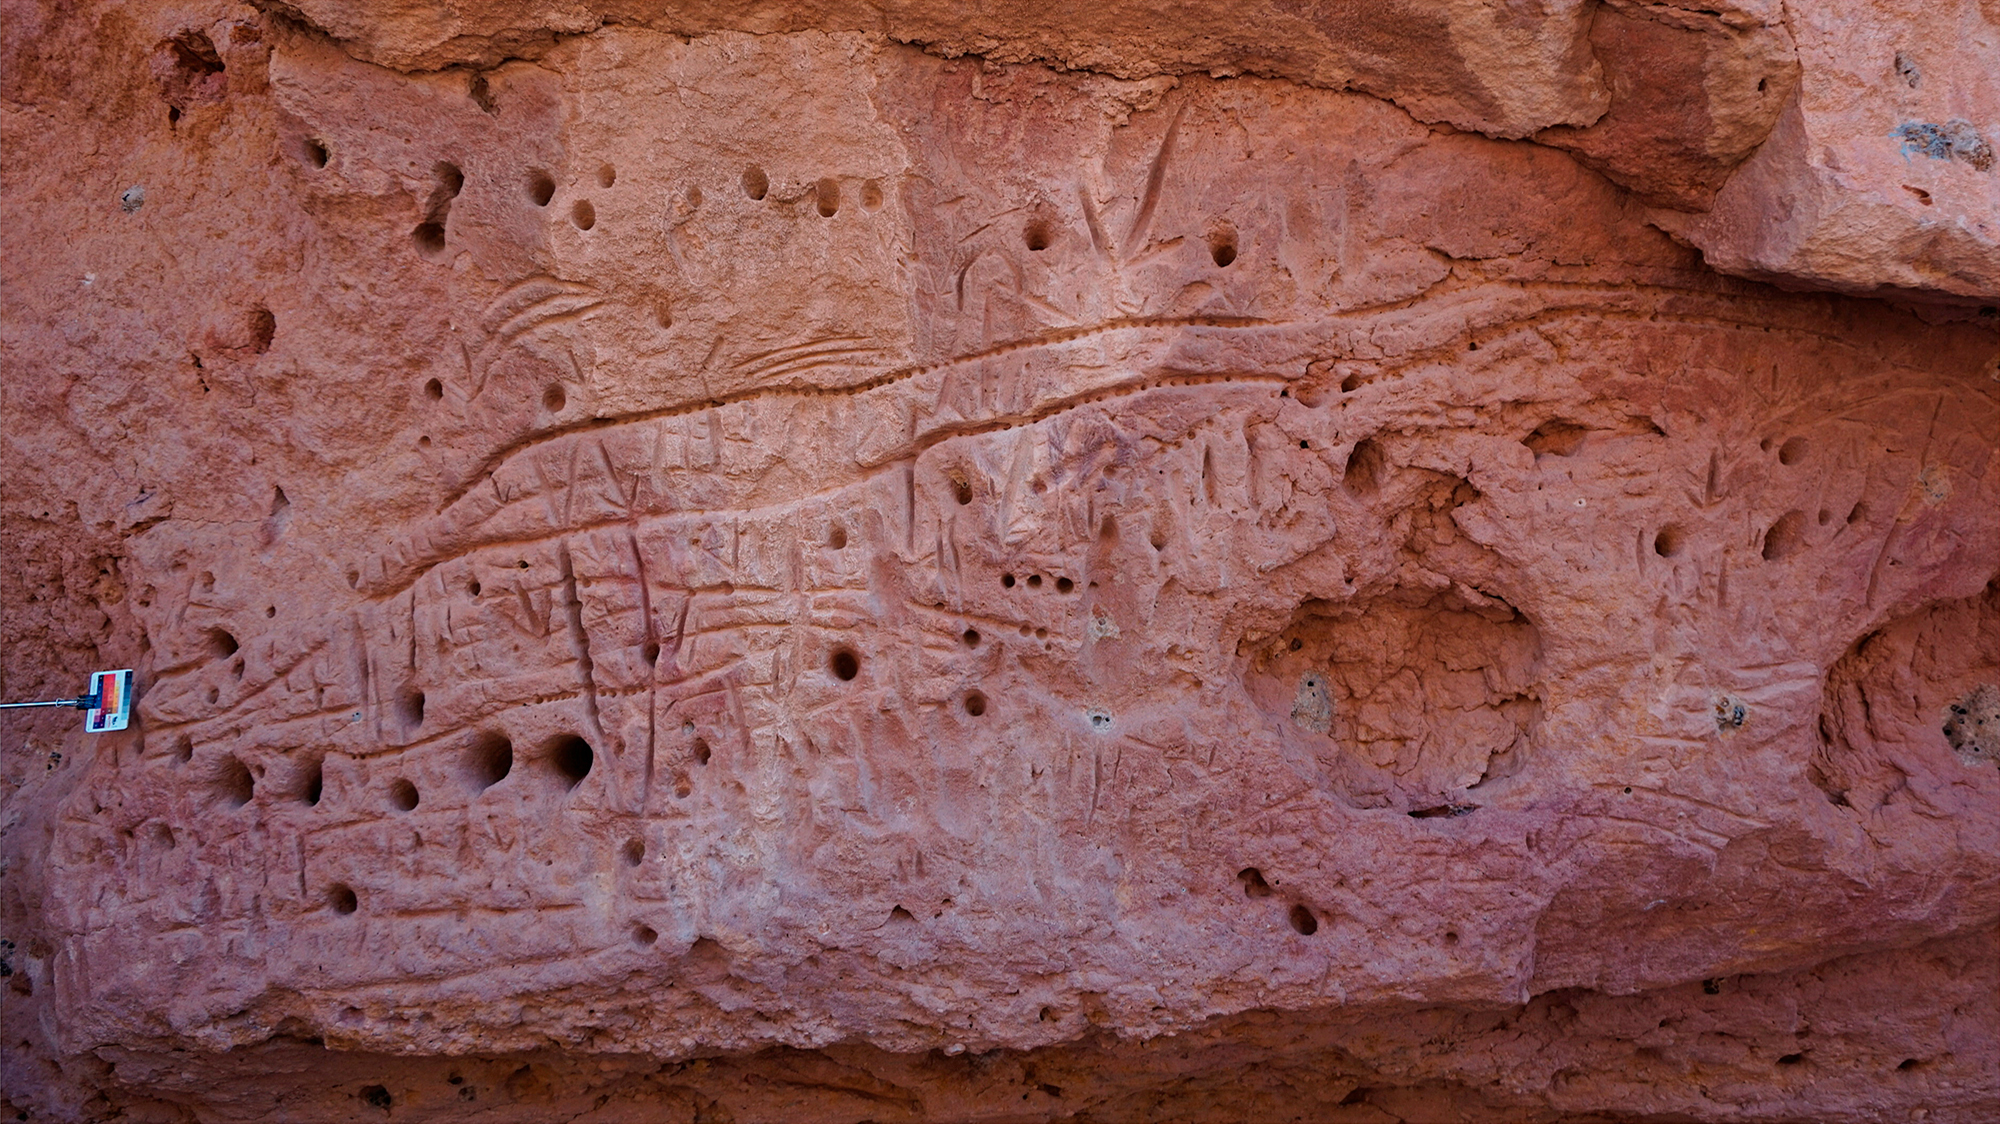 Engraved snake-like design on the wall between the anthropomorph and the cluster of engraved feet